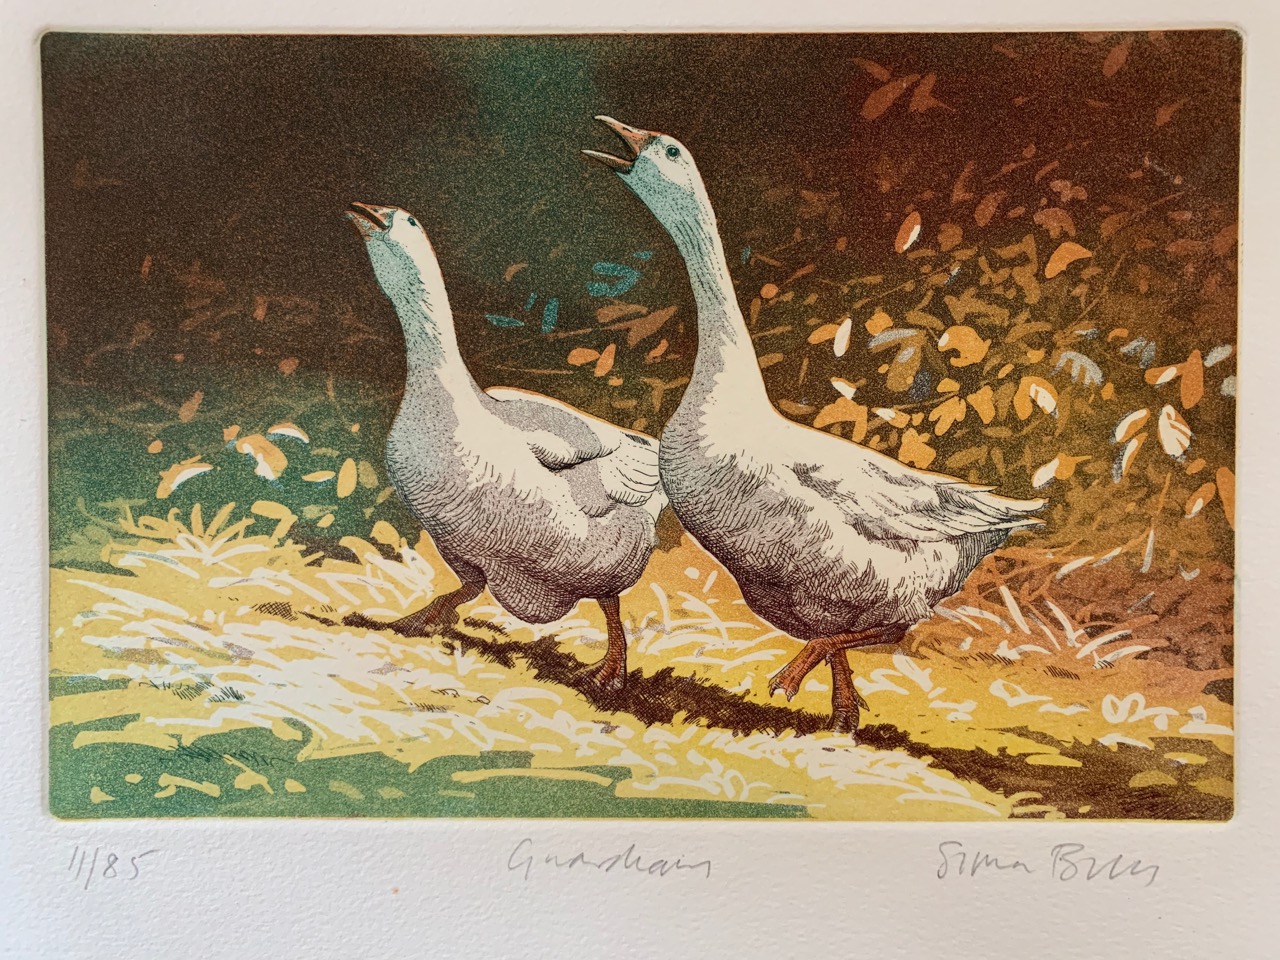 Simon Bull (b.1958), Depicting a pair of geese calling out from the edge of a forest, limited